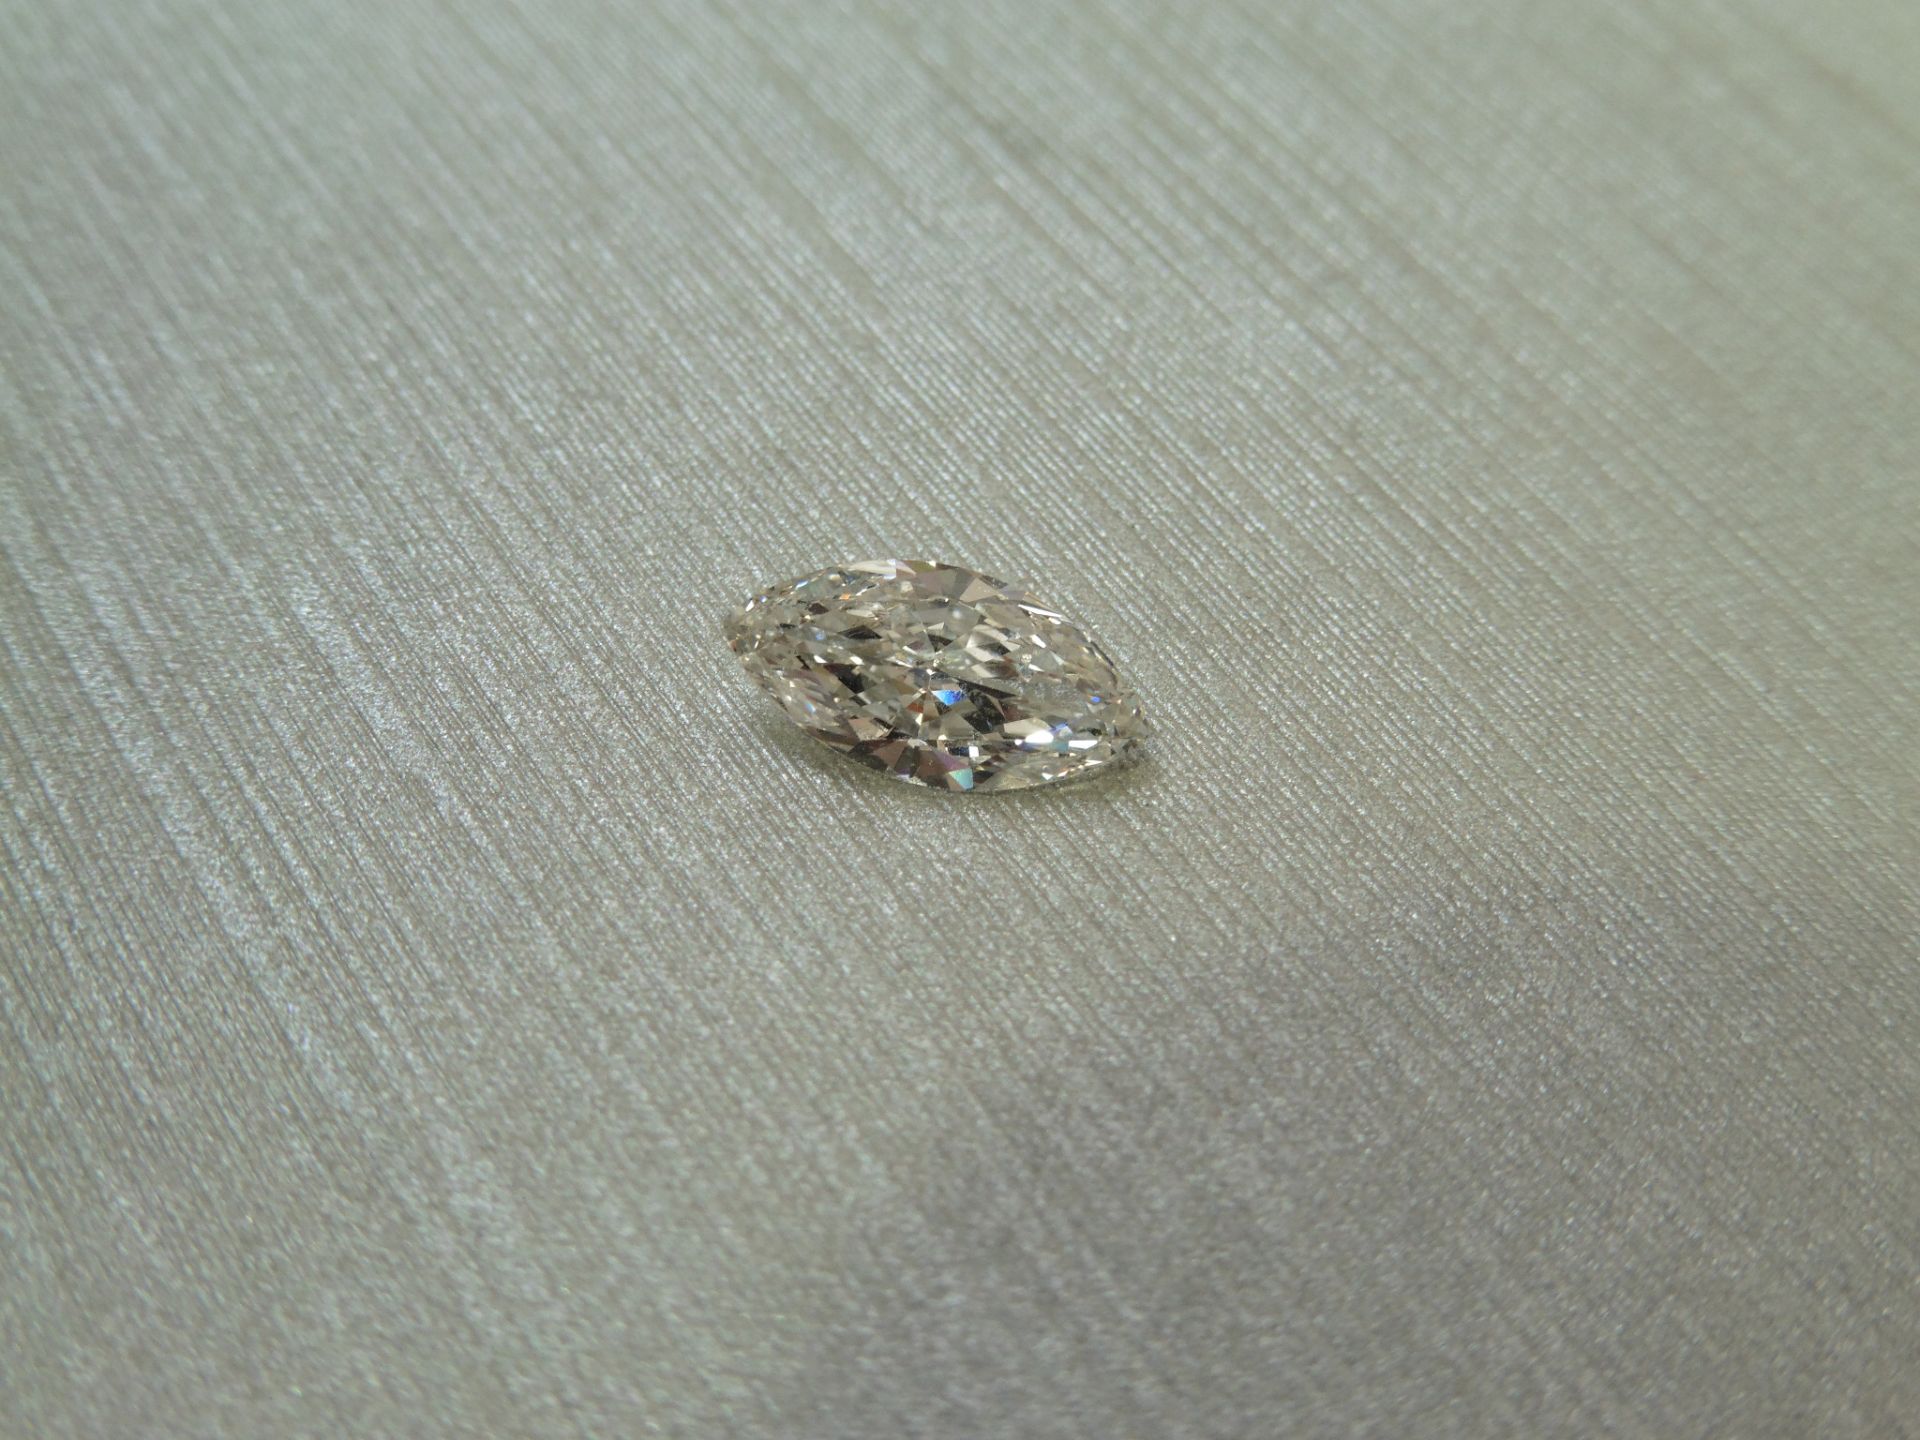 1.73ct single marquise cut diamond. Measurements 12.90 x 6.44 x 3.32mm. F colour and SI2 clarity. - Image 2 of 6